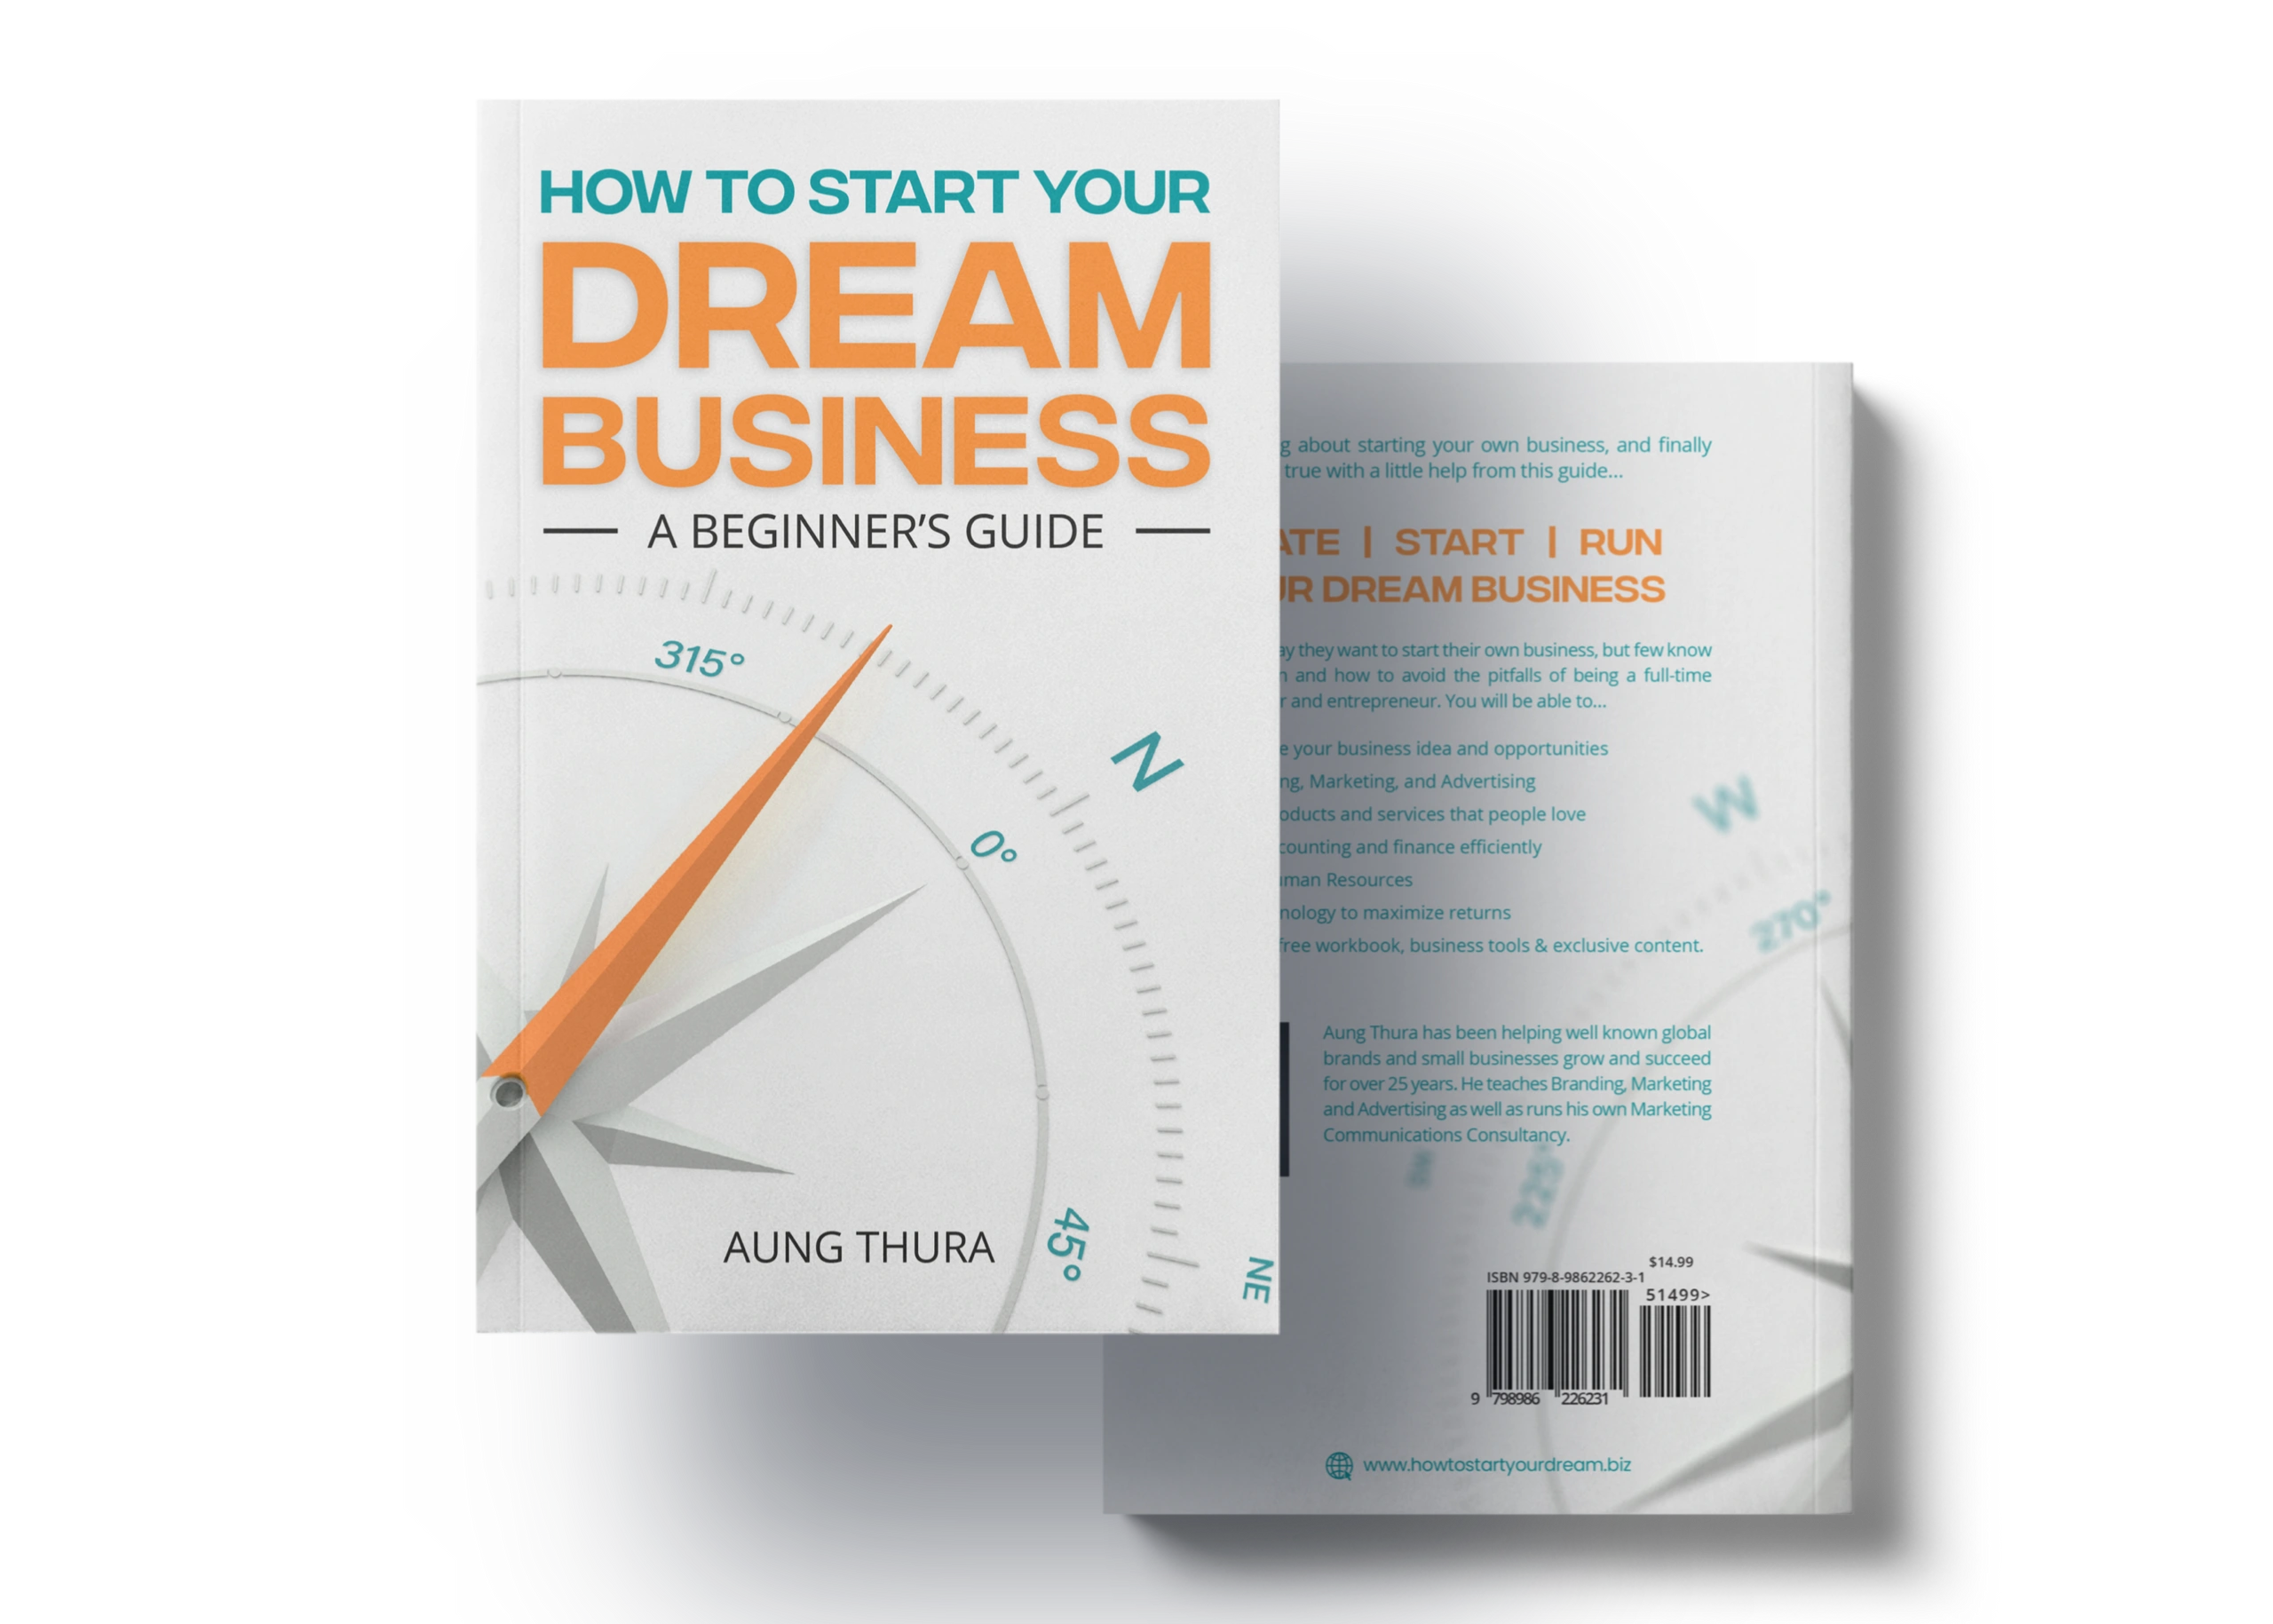 How to start your dream business book cover in 3D